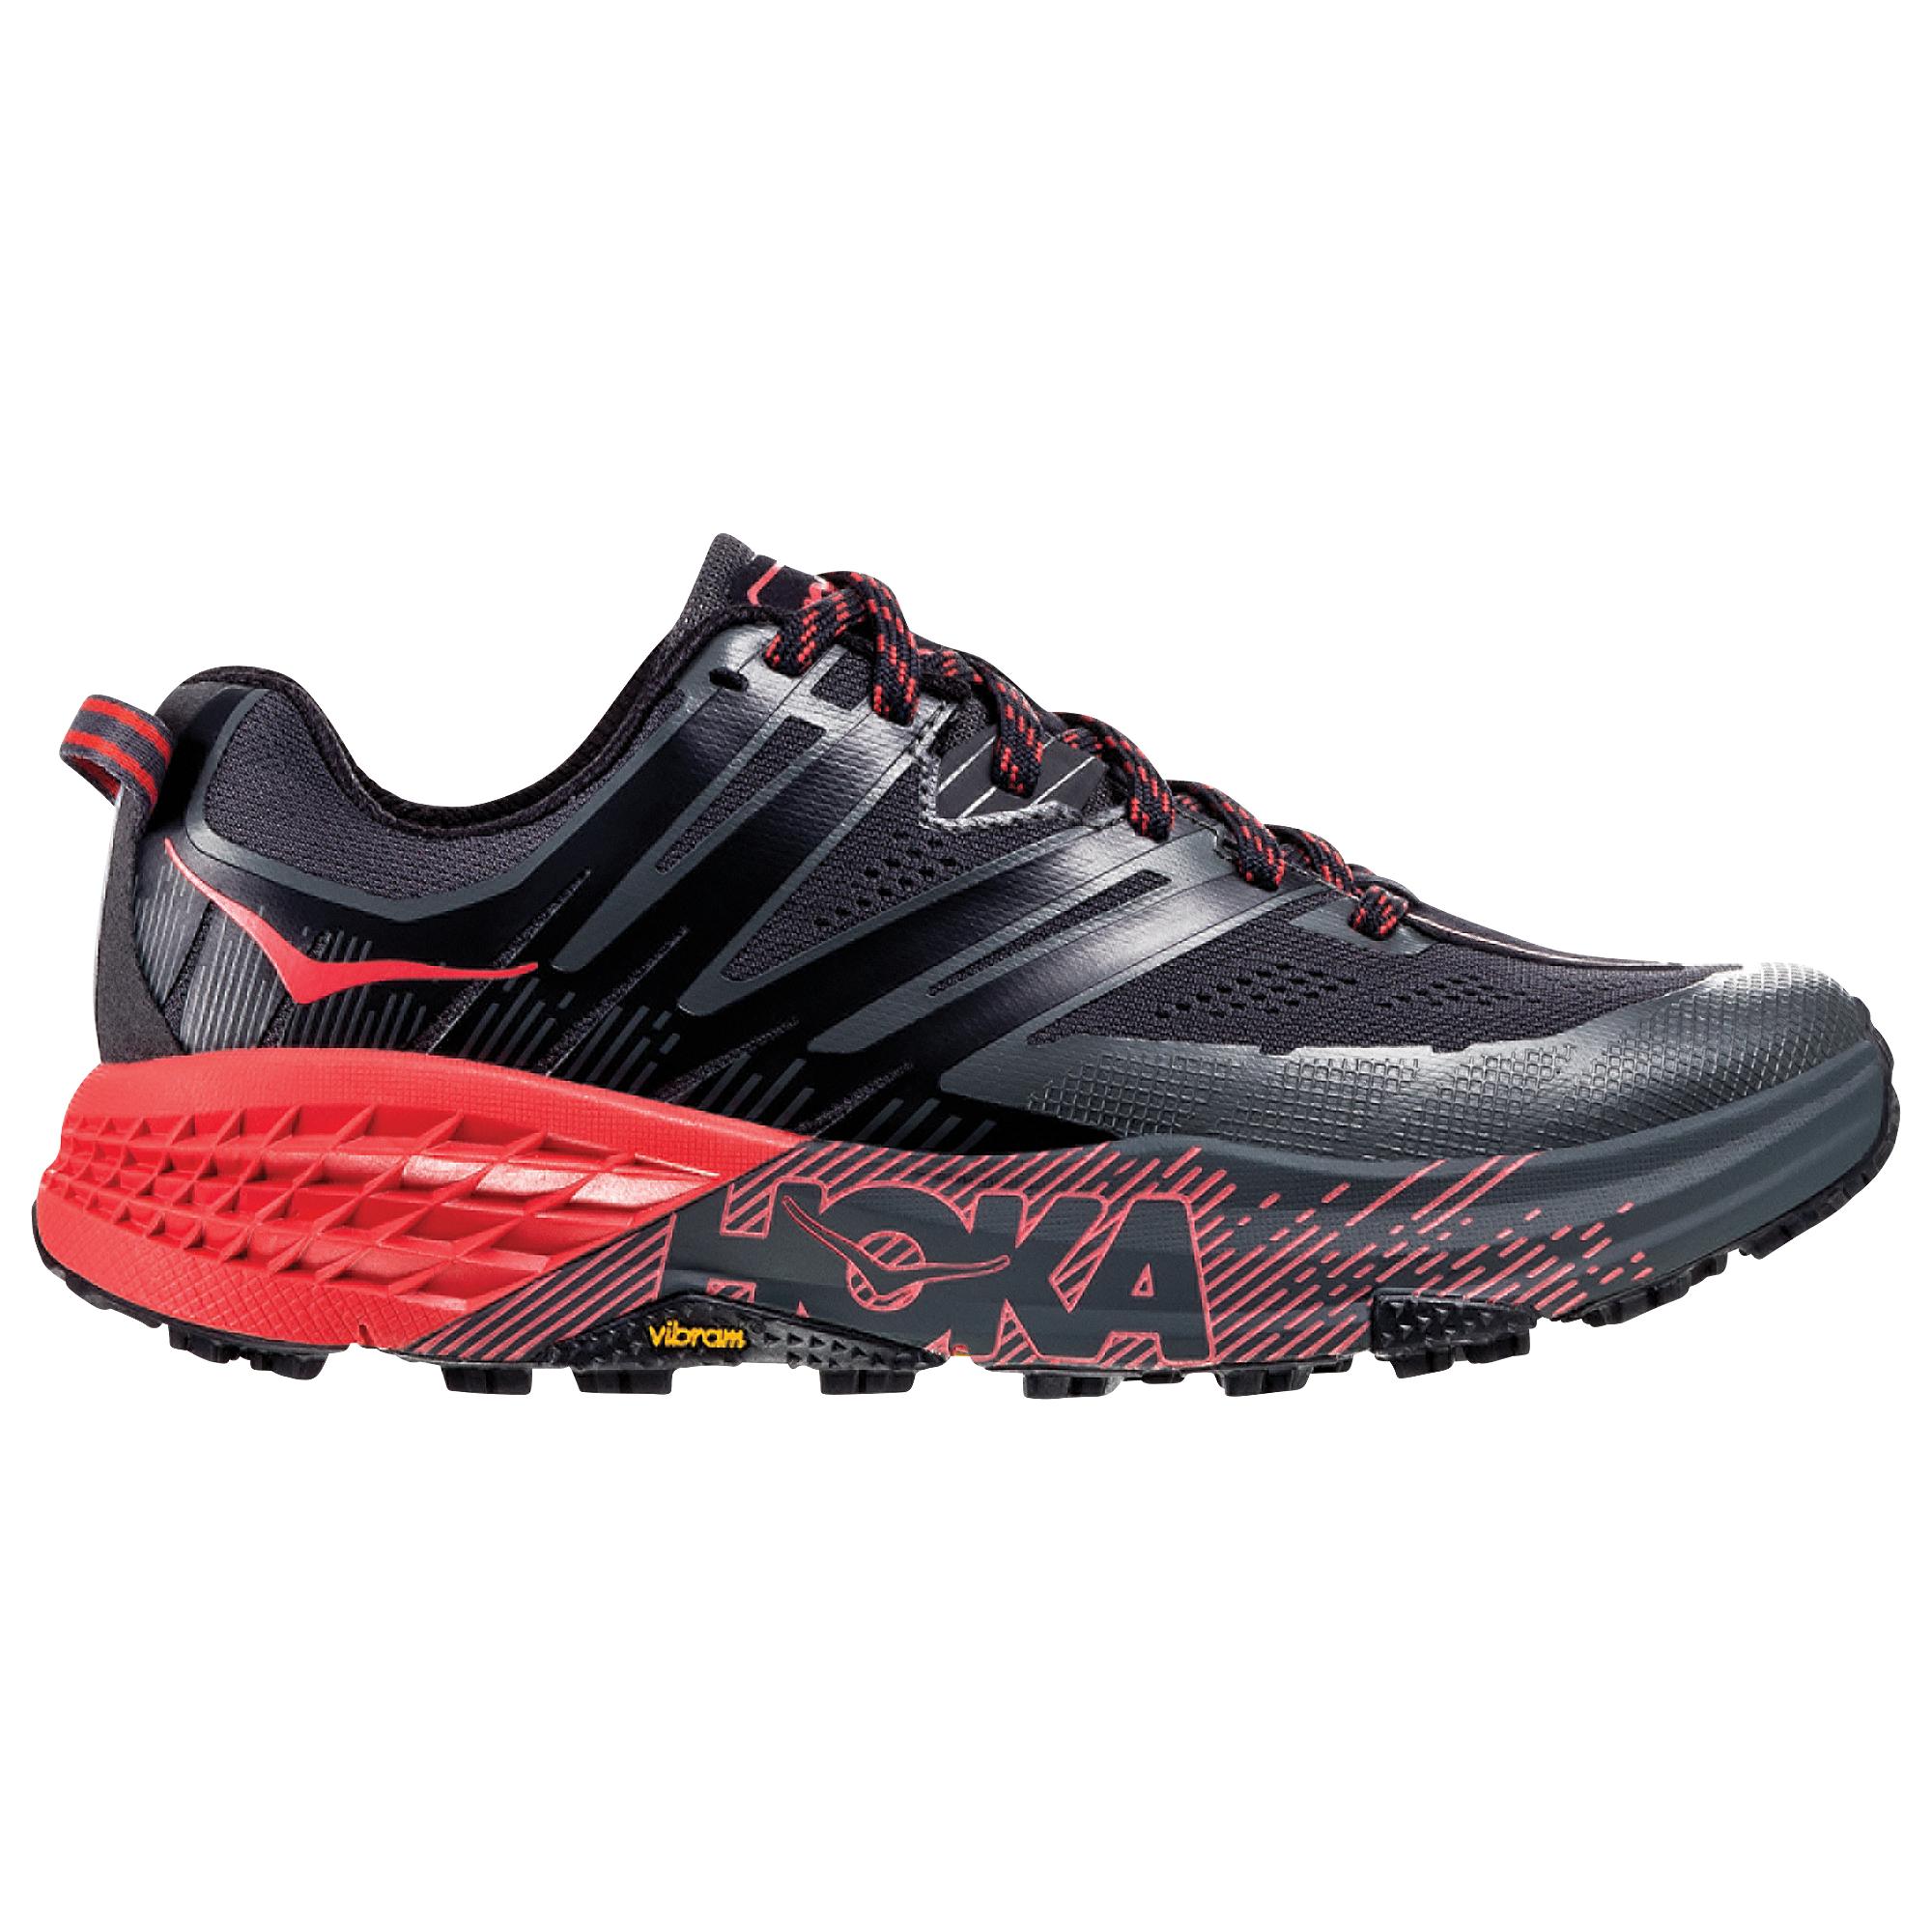 Hoka One One Speedgoat 3 Trail Shoes in Red - Lyst